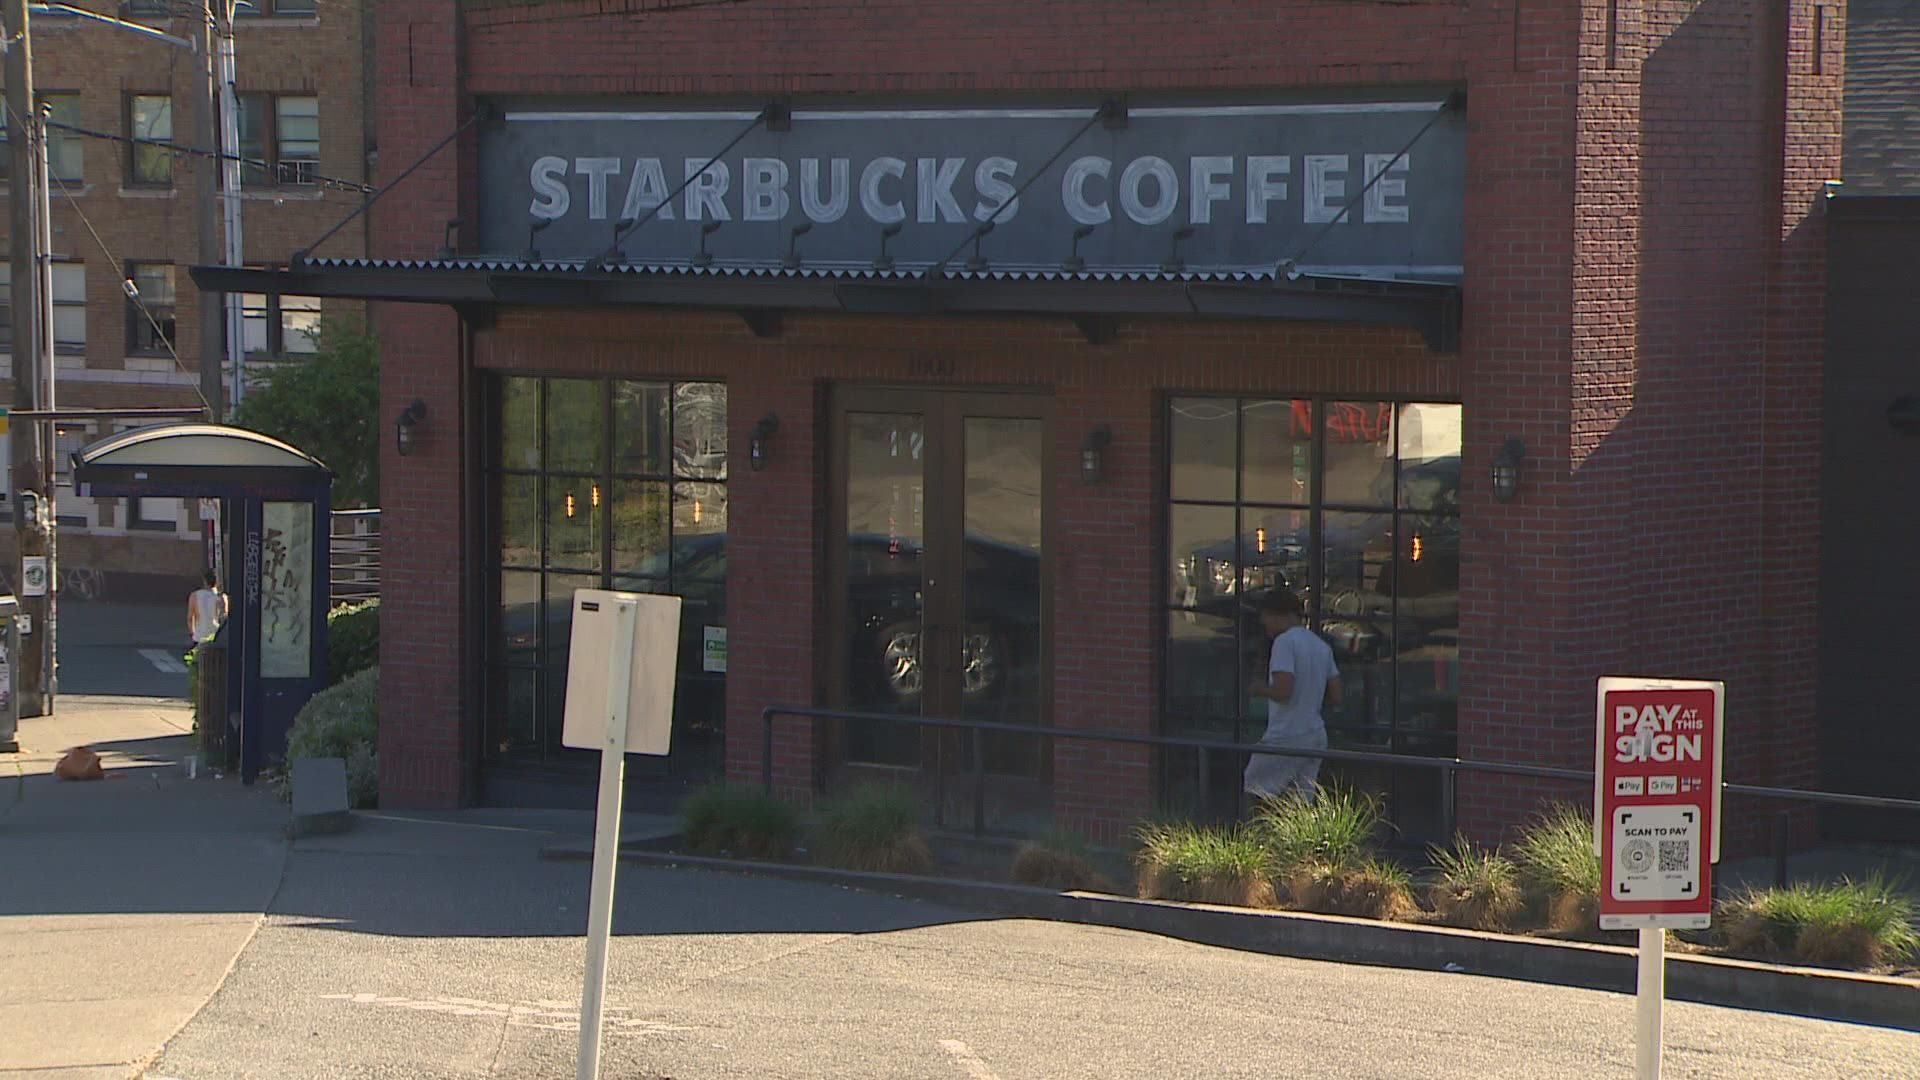 The stores will close on July 31, Starbucks said in a statement.